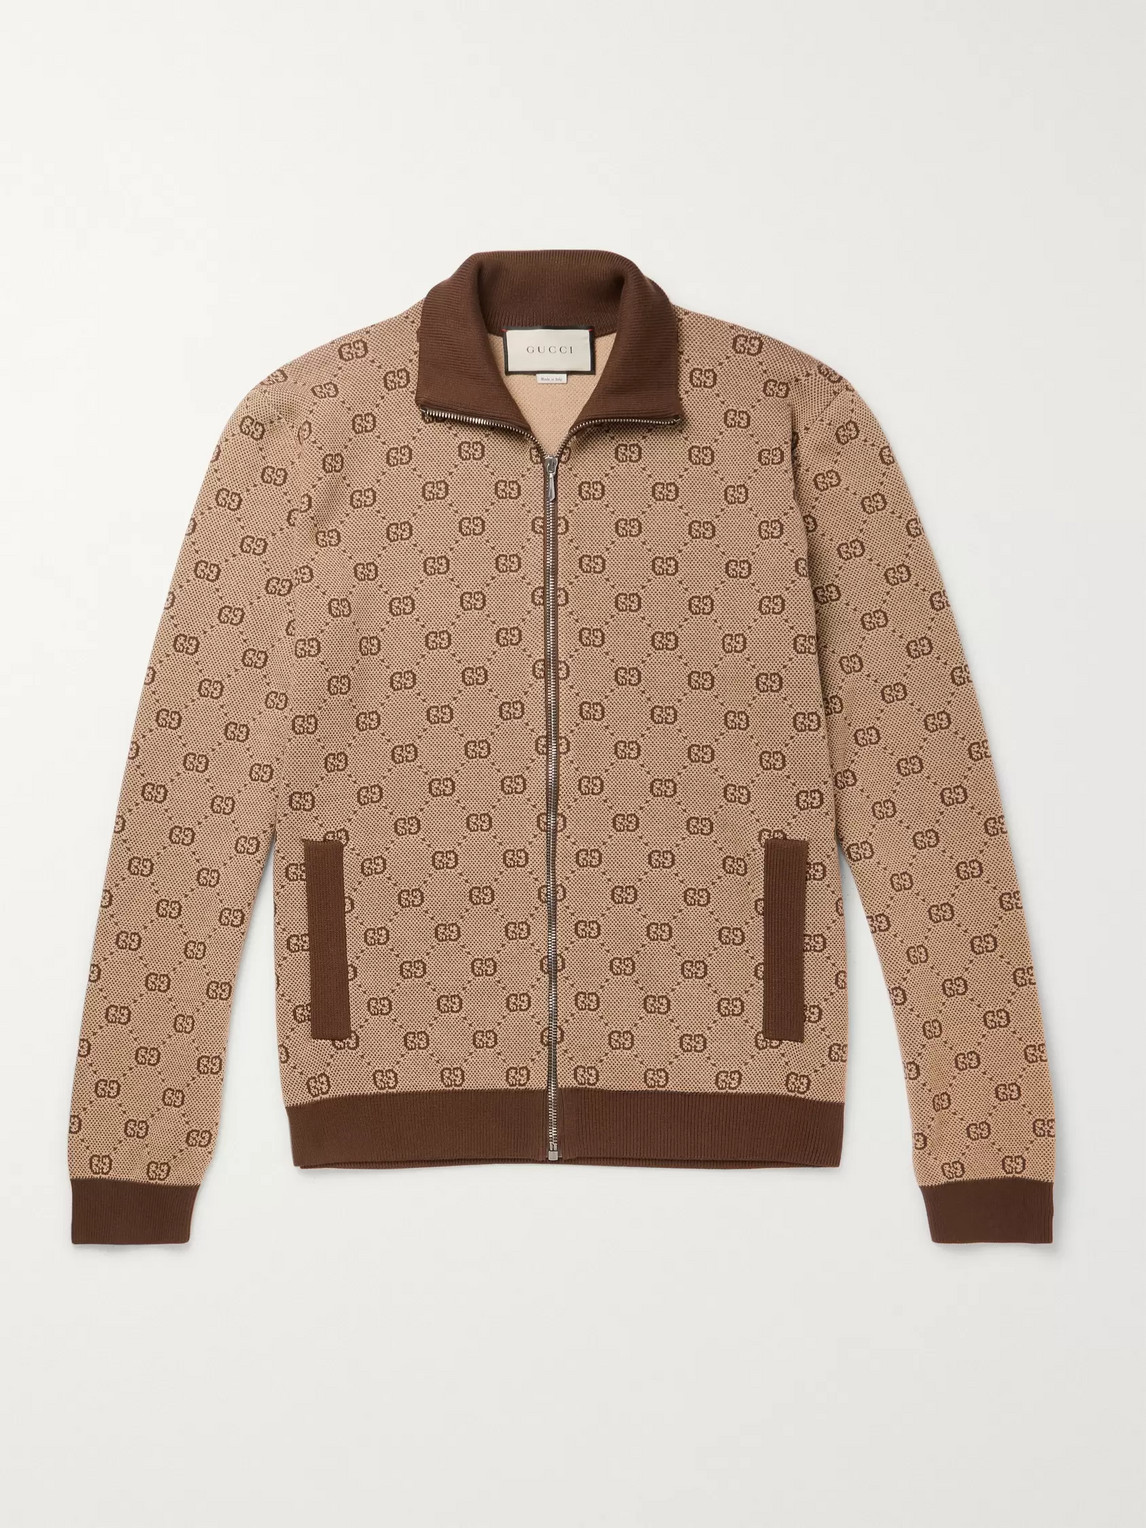 GUCCI LOGO-JACQUARD WOOL AND COTTON-BLEND TRACK JACKET